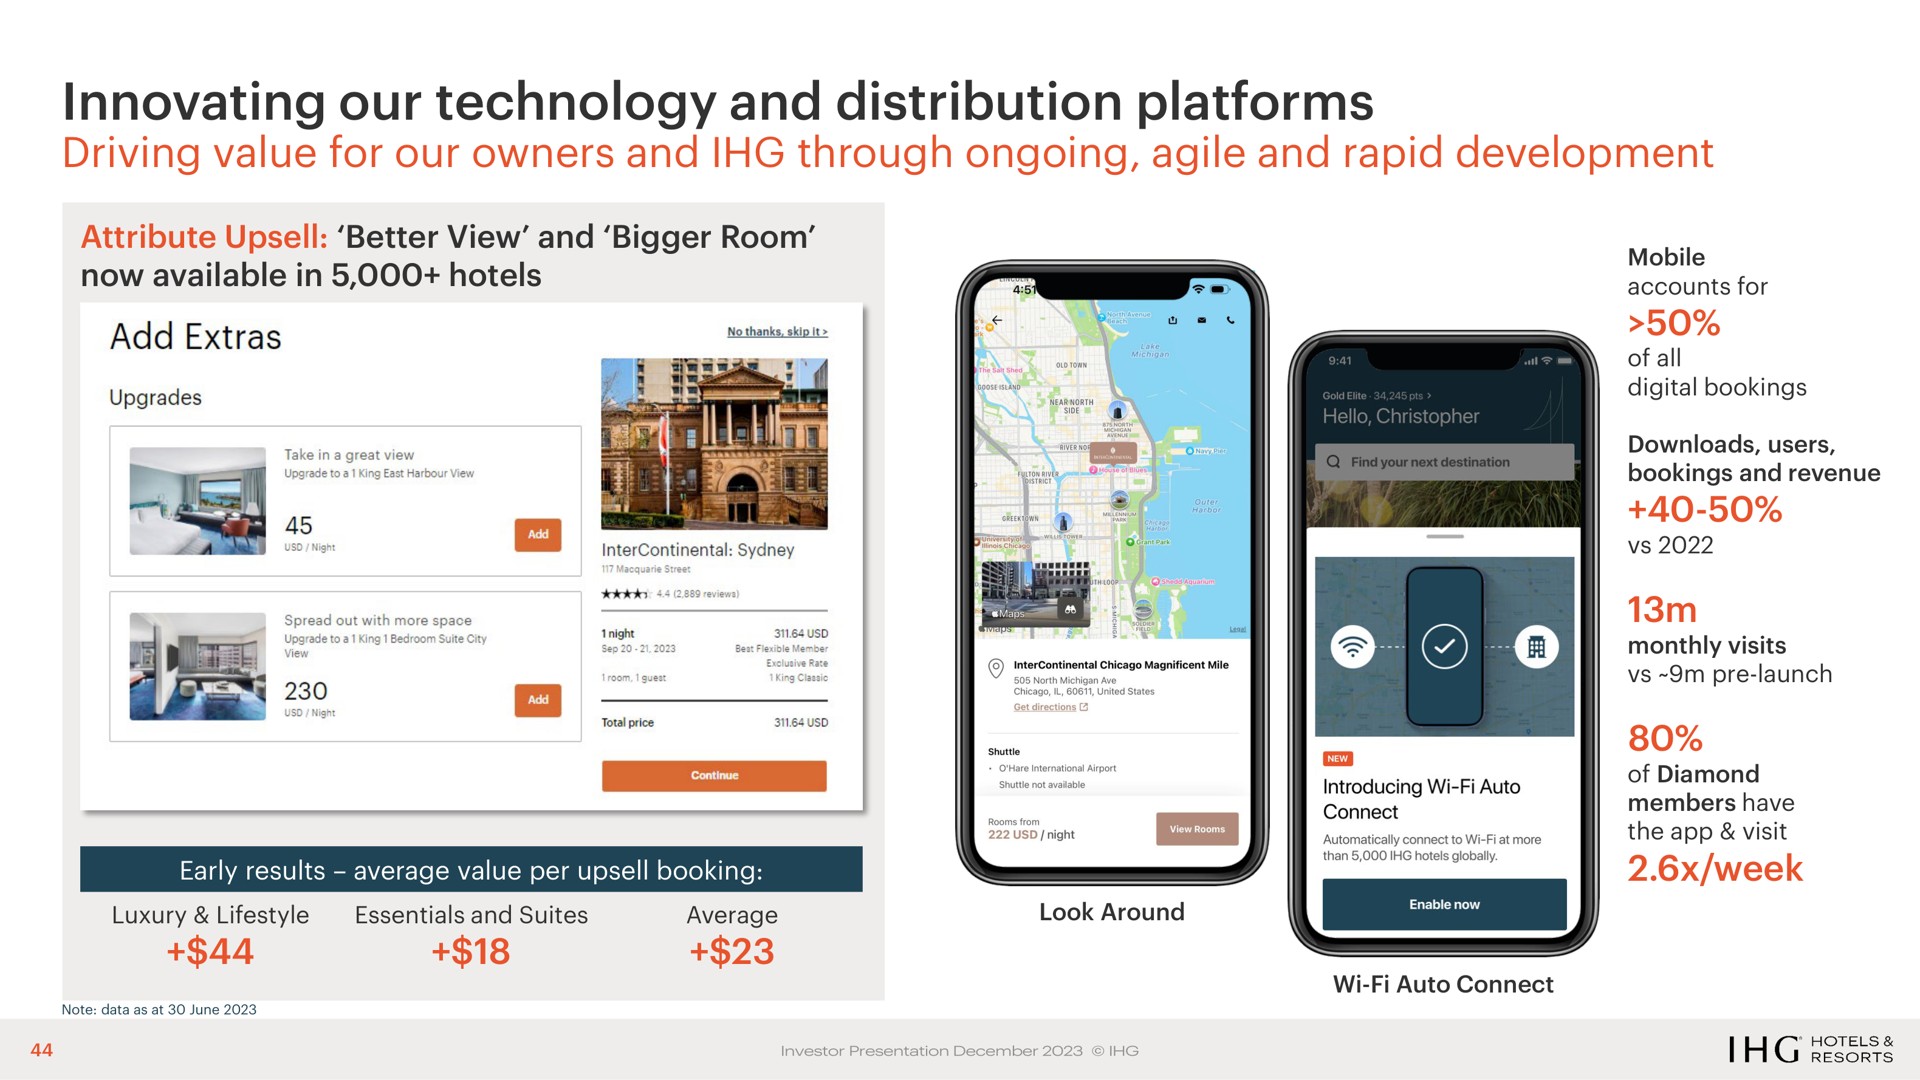 innovating our technology and distribution platforms | IHG Hotels